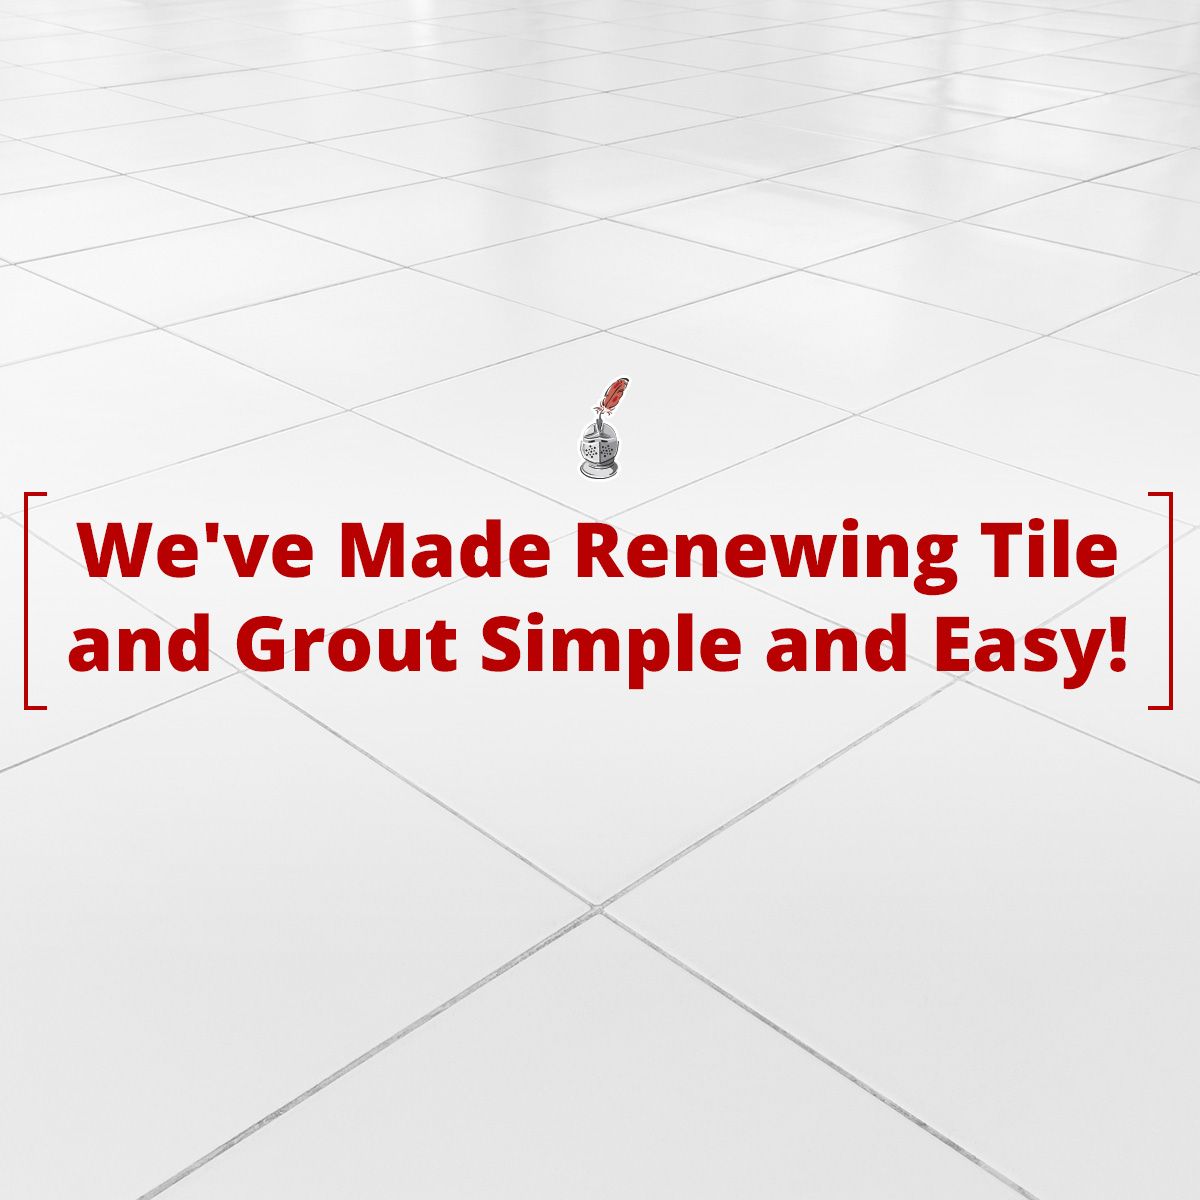 We've Made Renewing Tile and Grout Simple and Easy!